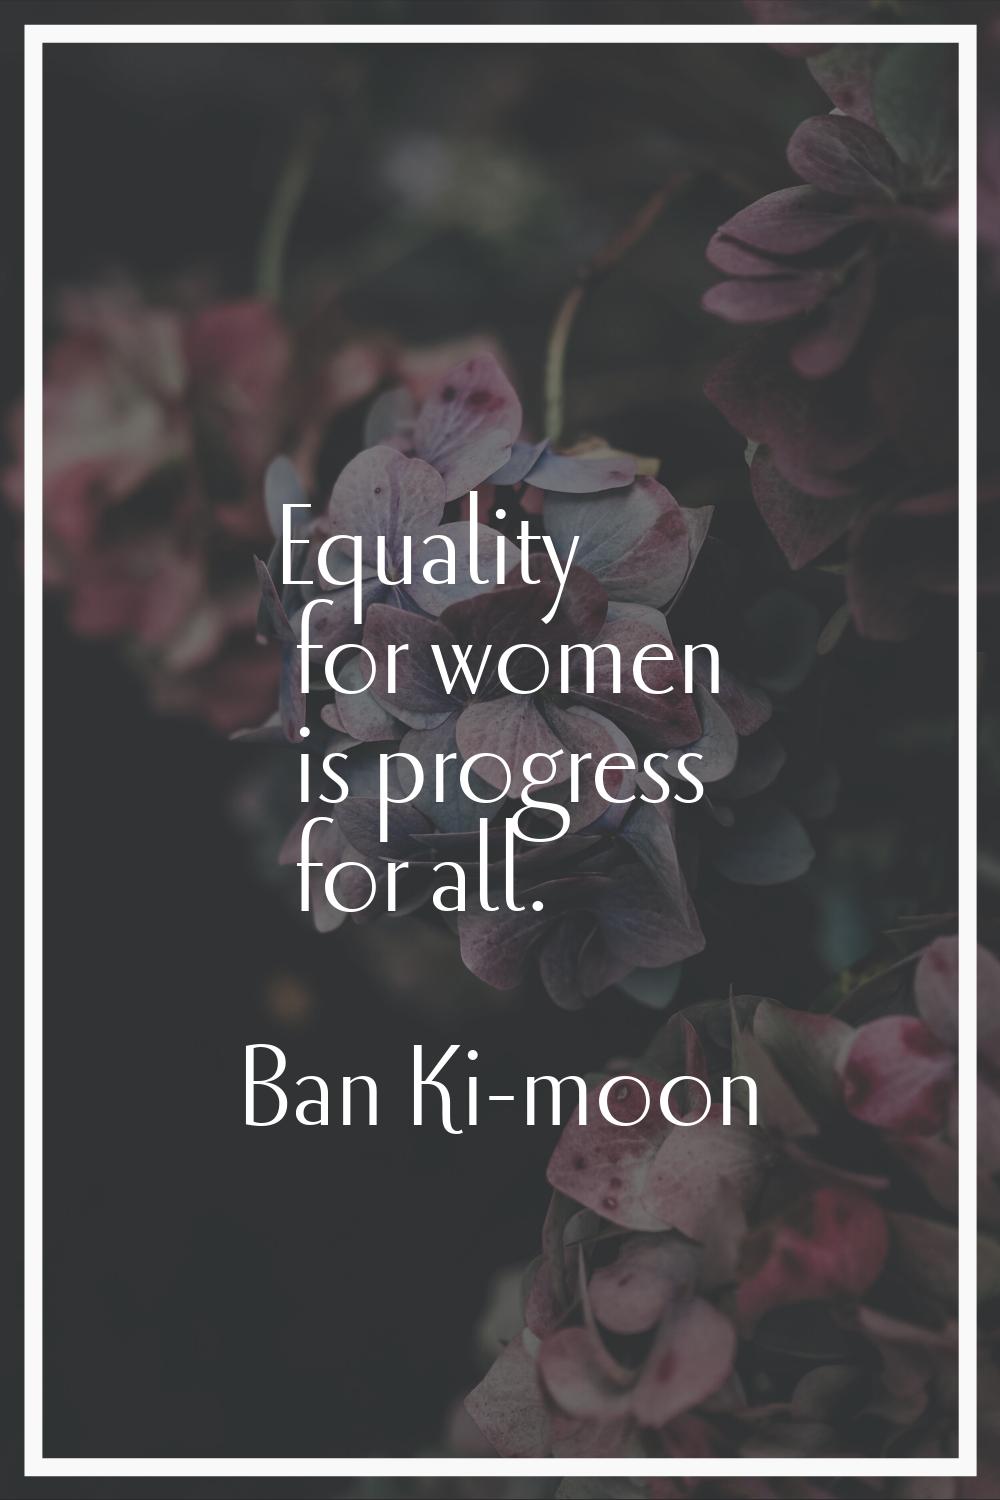 Equality for women is progress for all.